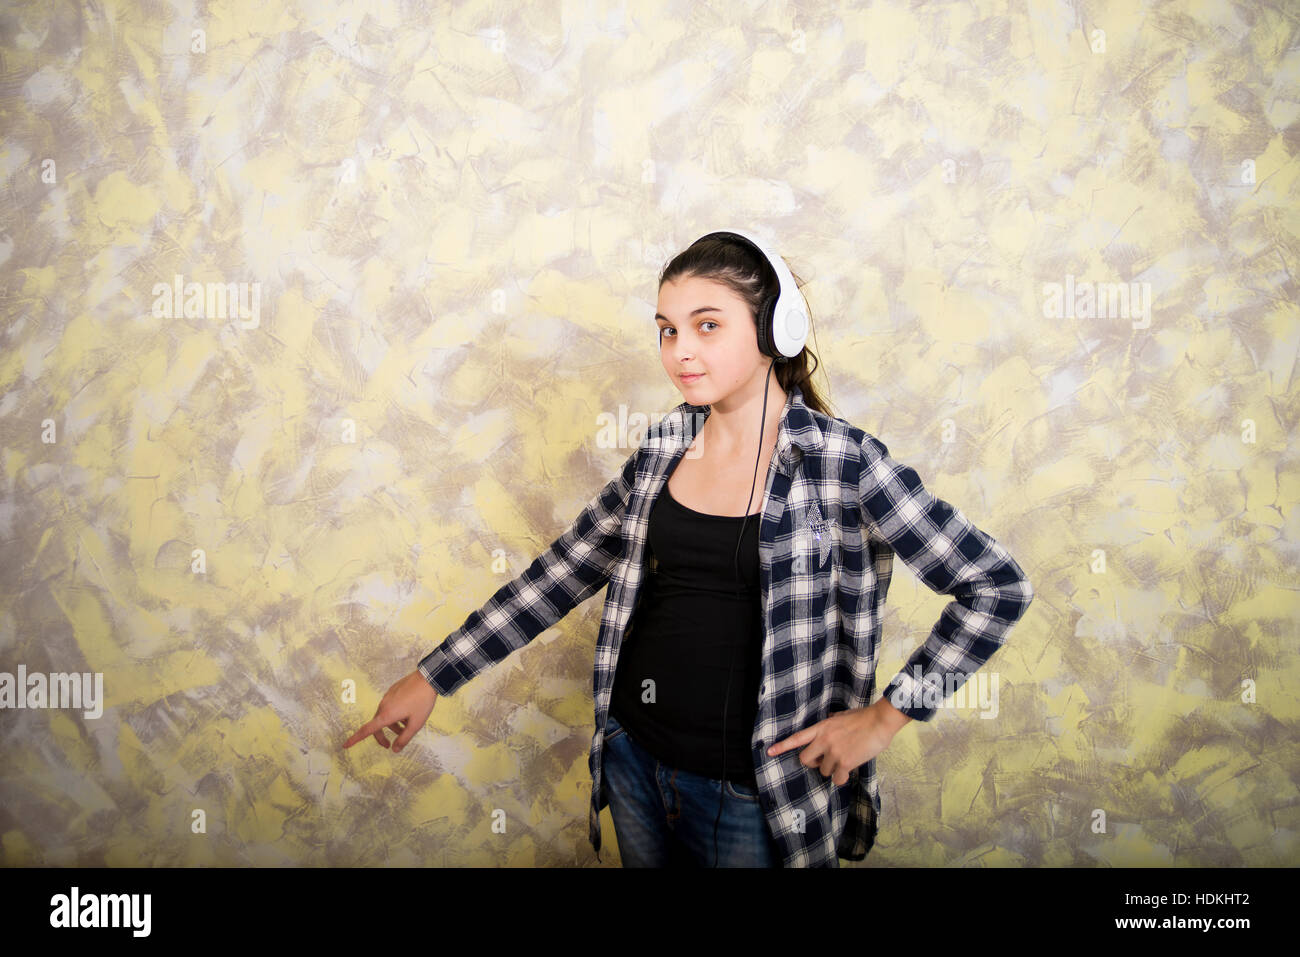 Pretty girl in plaid shirt with headset Stock Photo